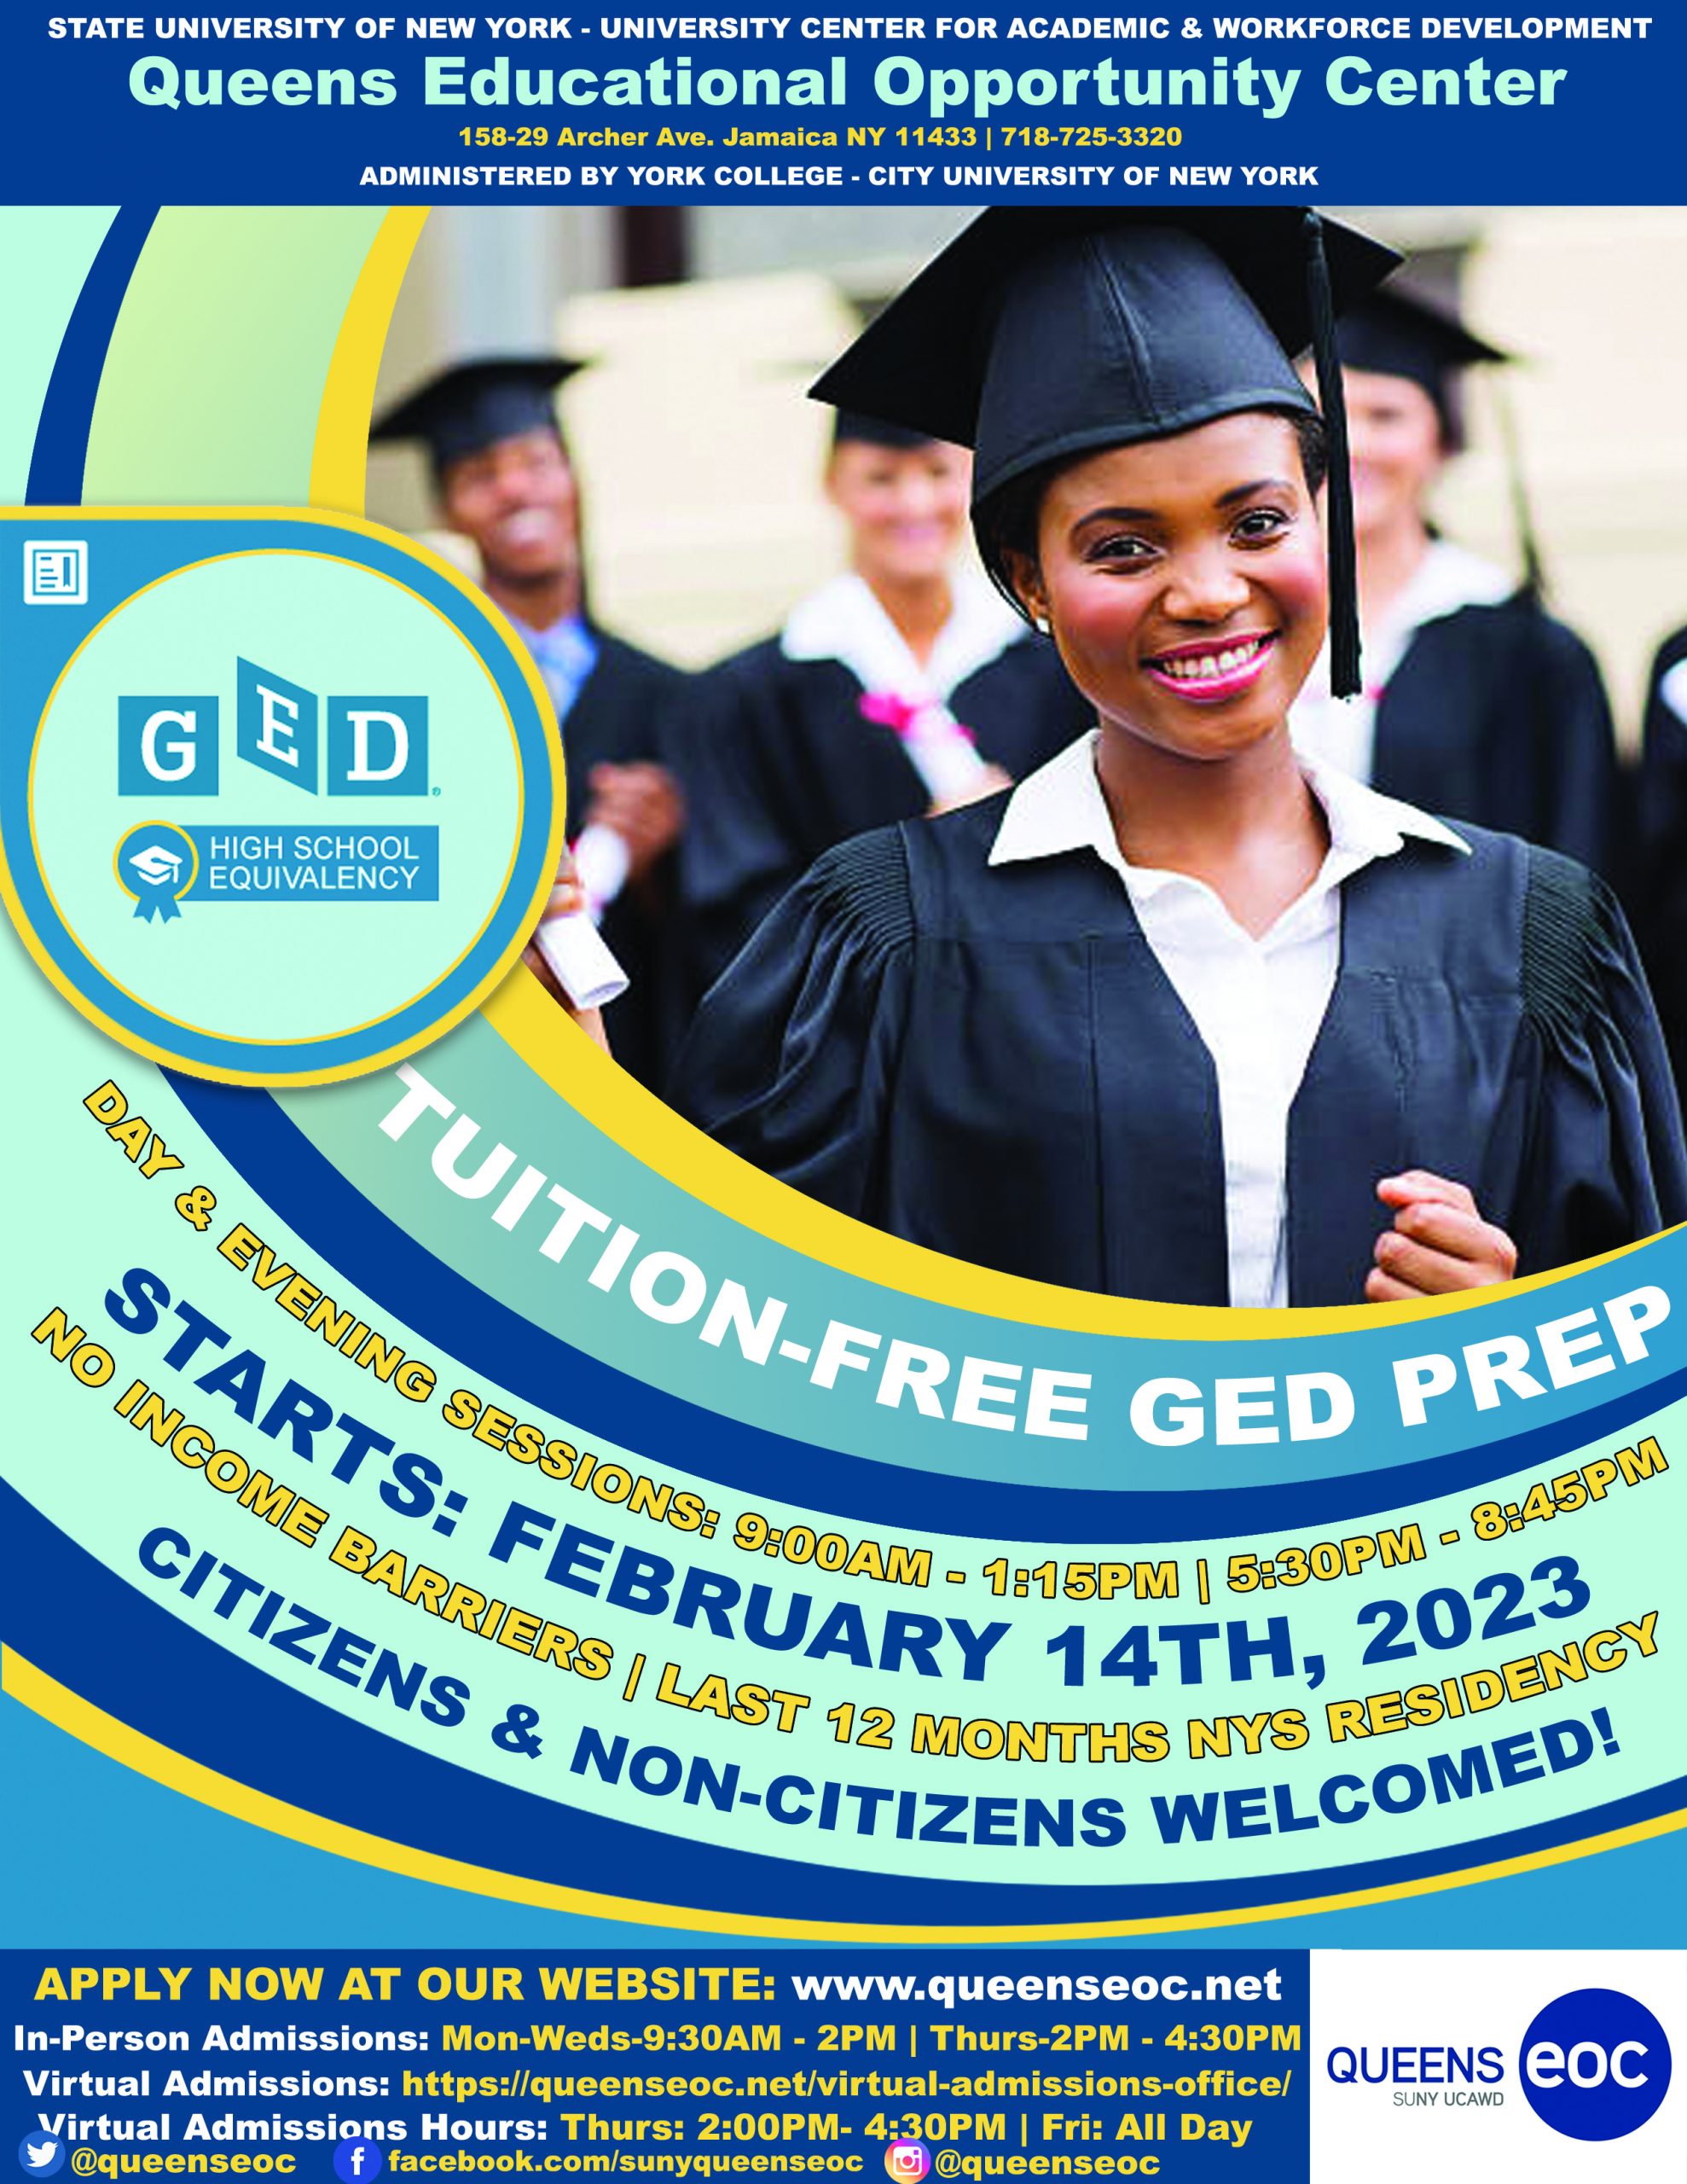 TuitionFree GED Prep Day and Evening Sessions 900 AM 115 PM